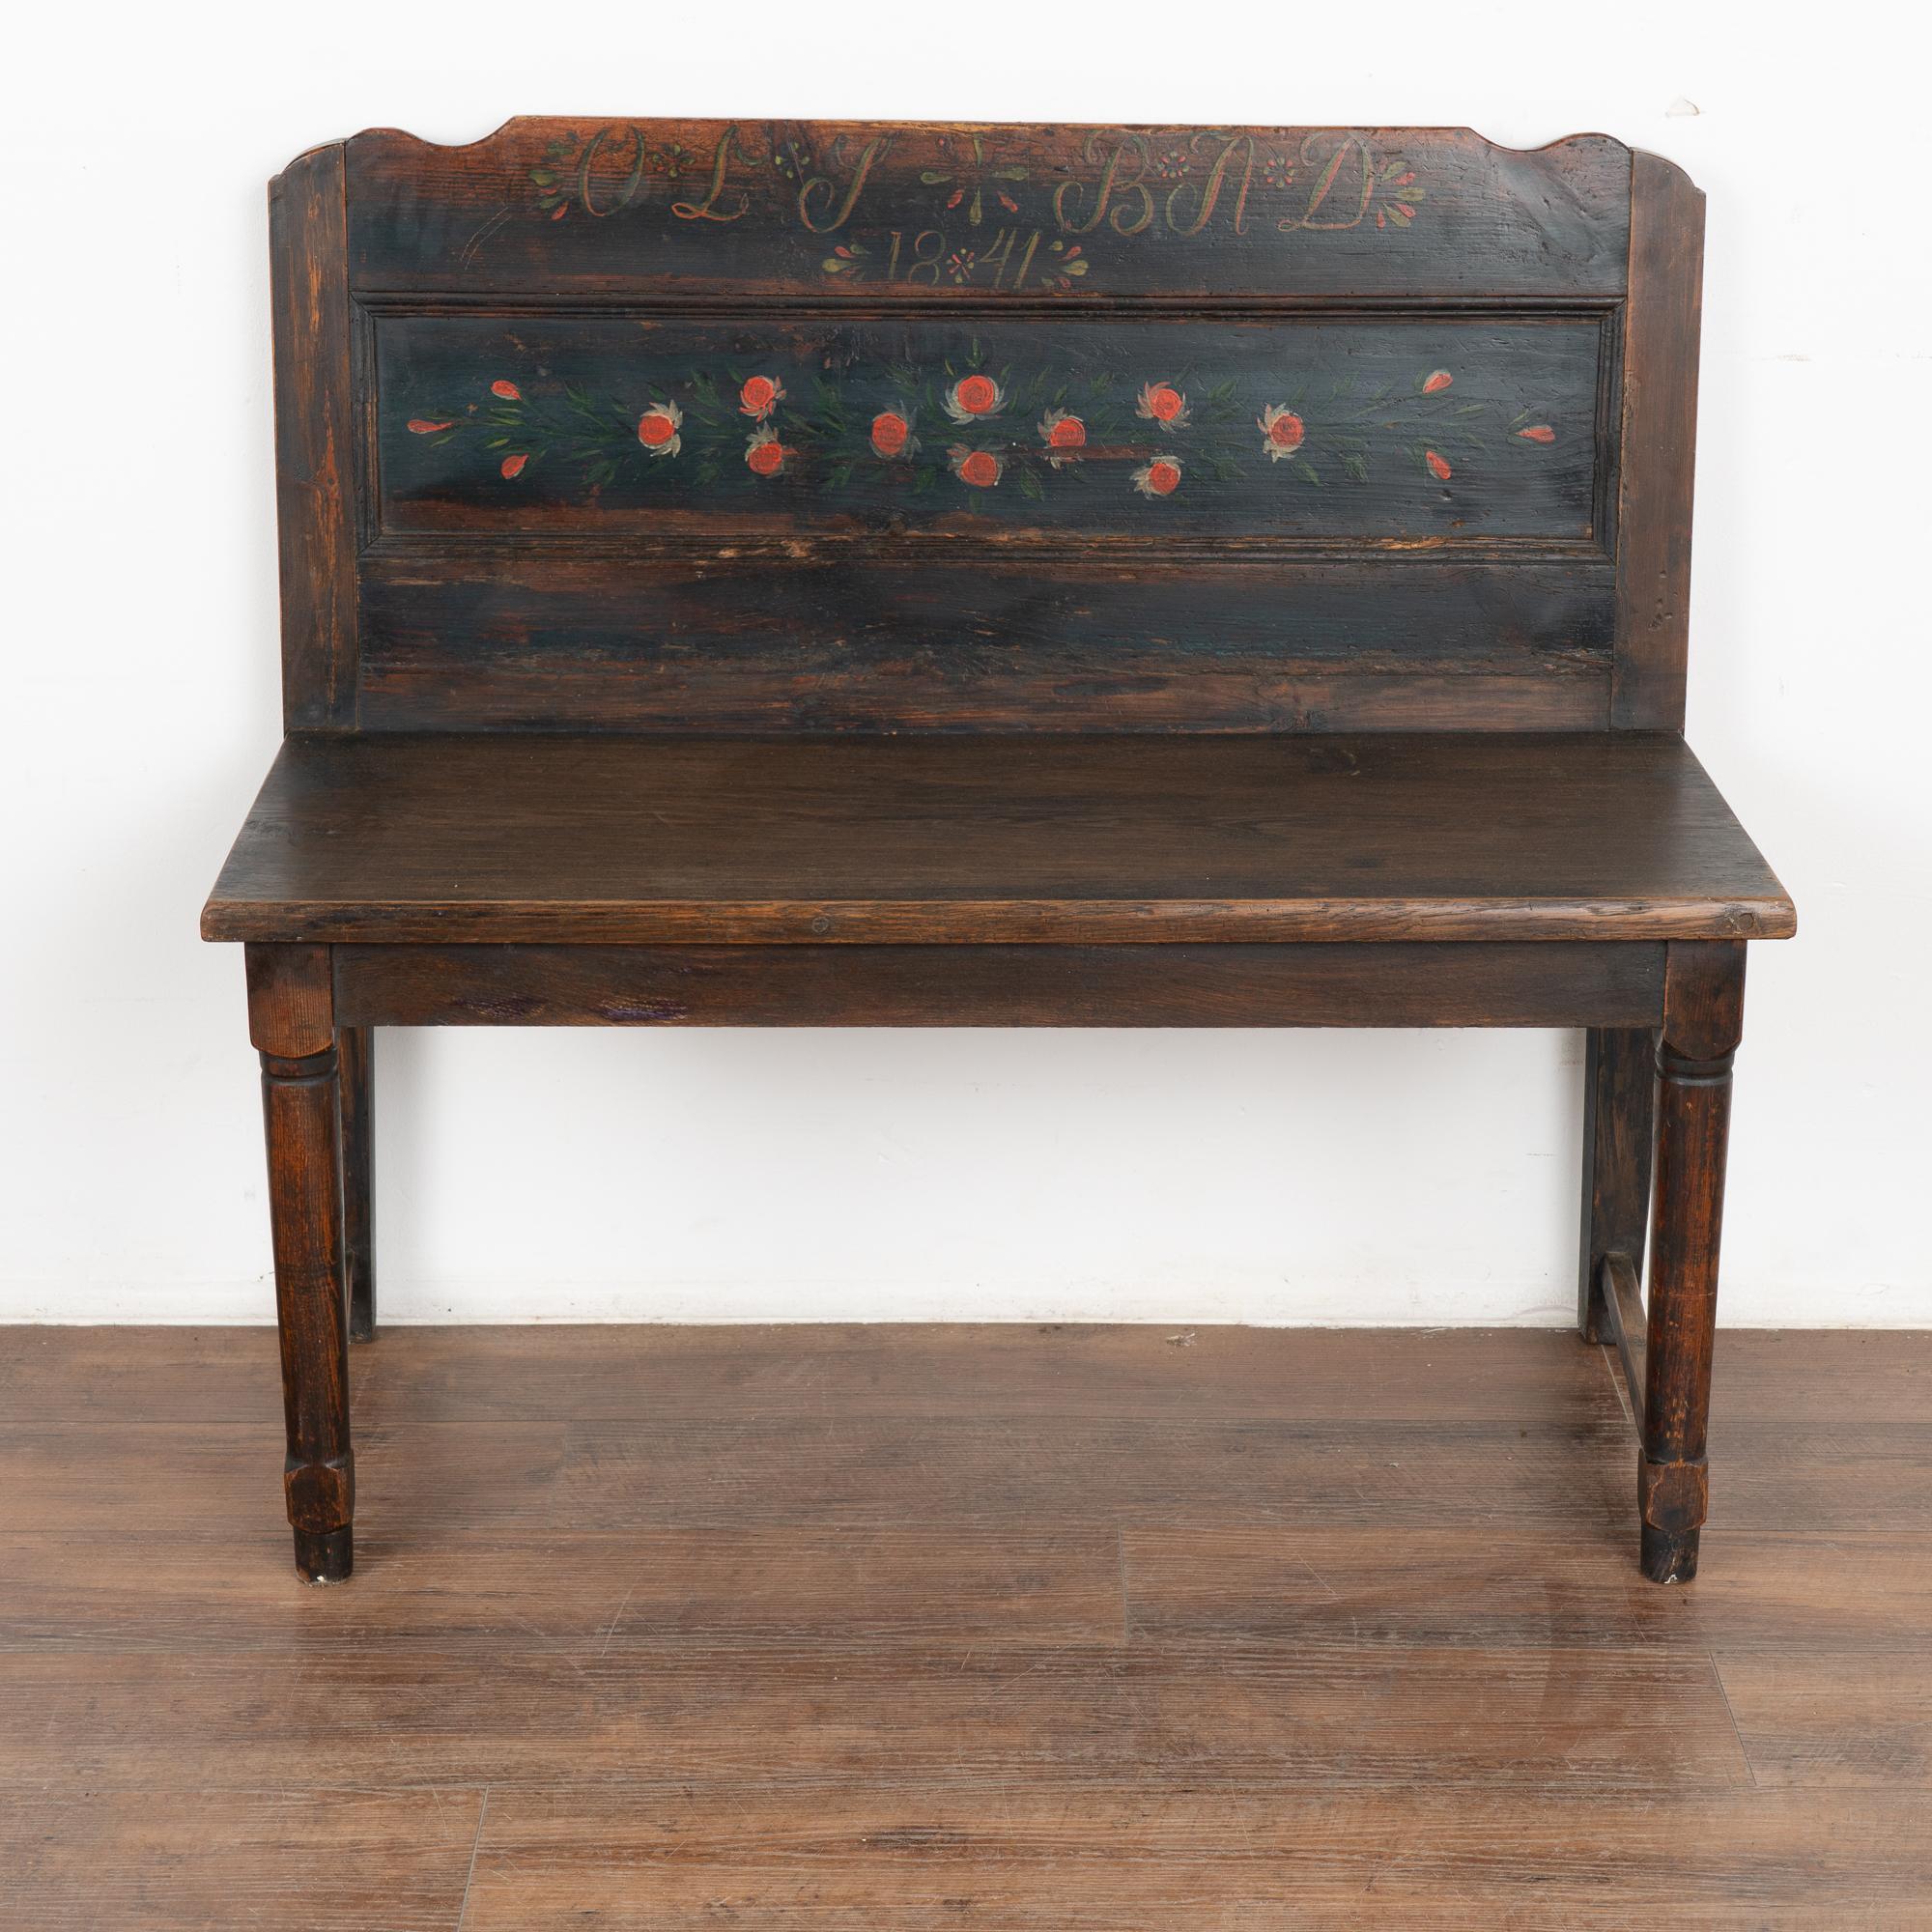 Folk Art Original Painted Small Bench, Hungary Dated 1841 For Sale